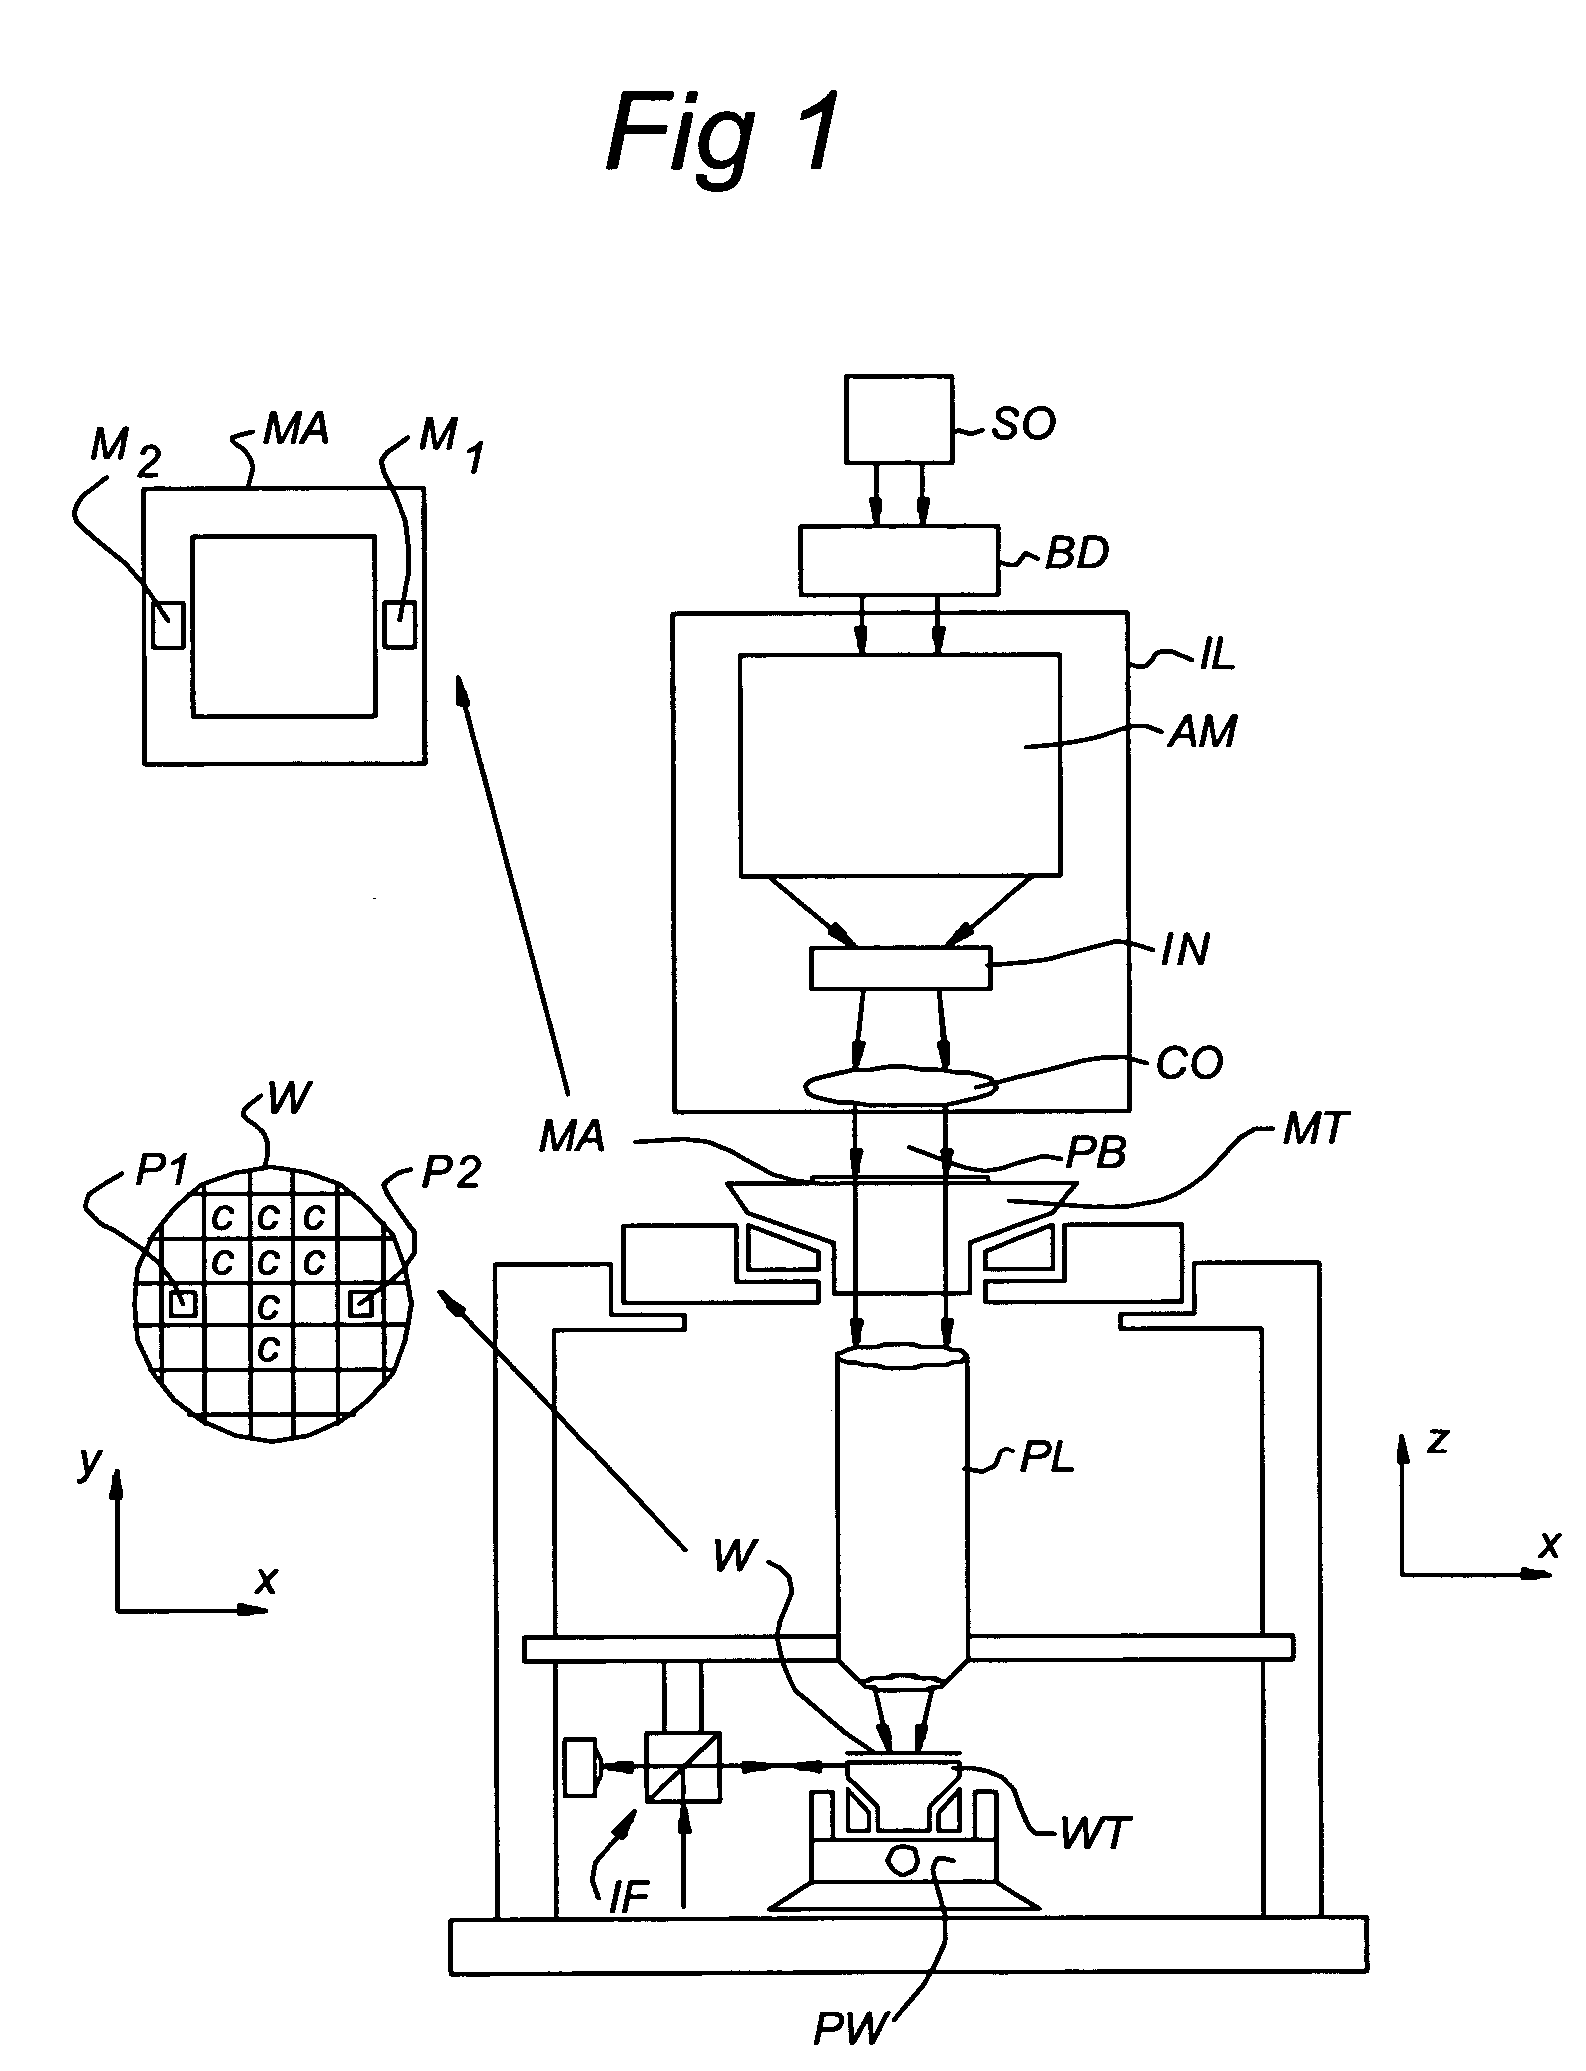 Illumination assembly, method for providing a radiation beam, lithographic projection apparatus and device manufacturing method